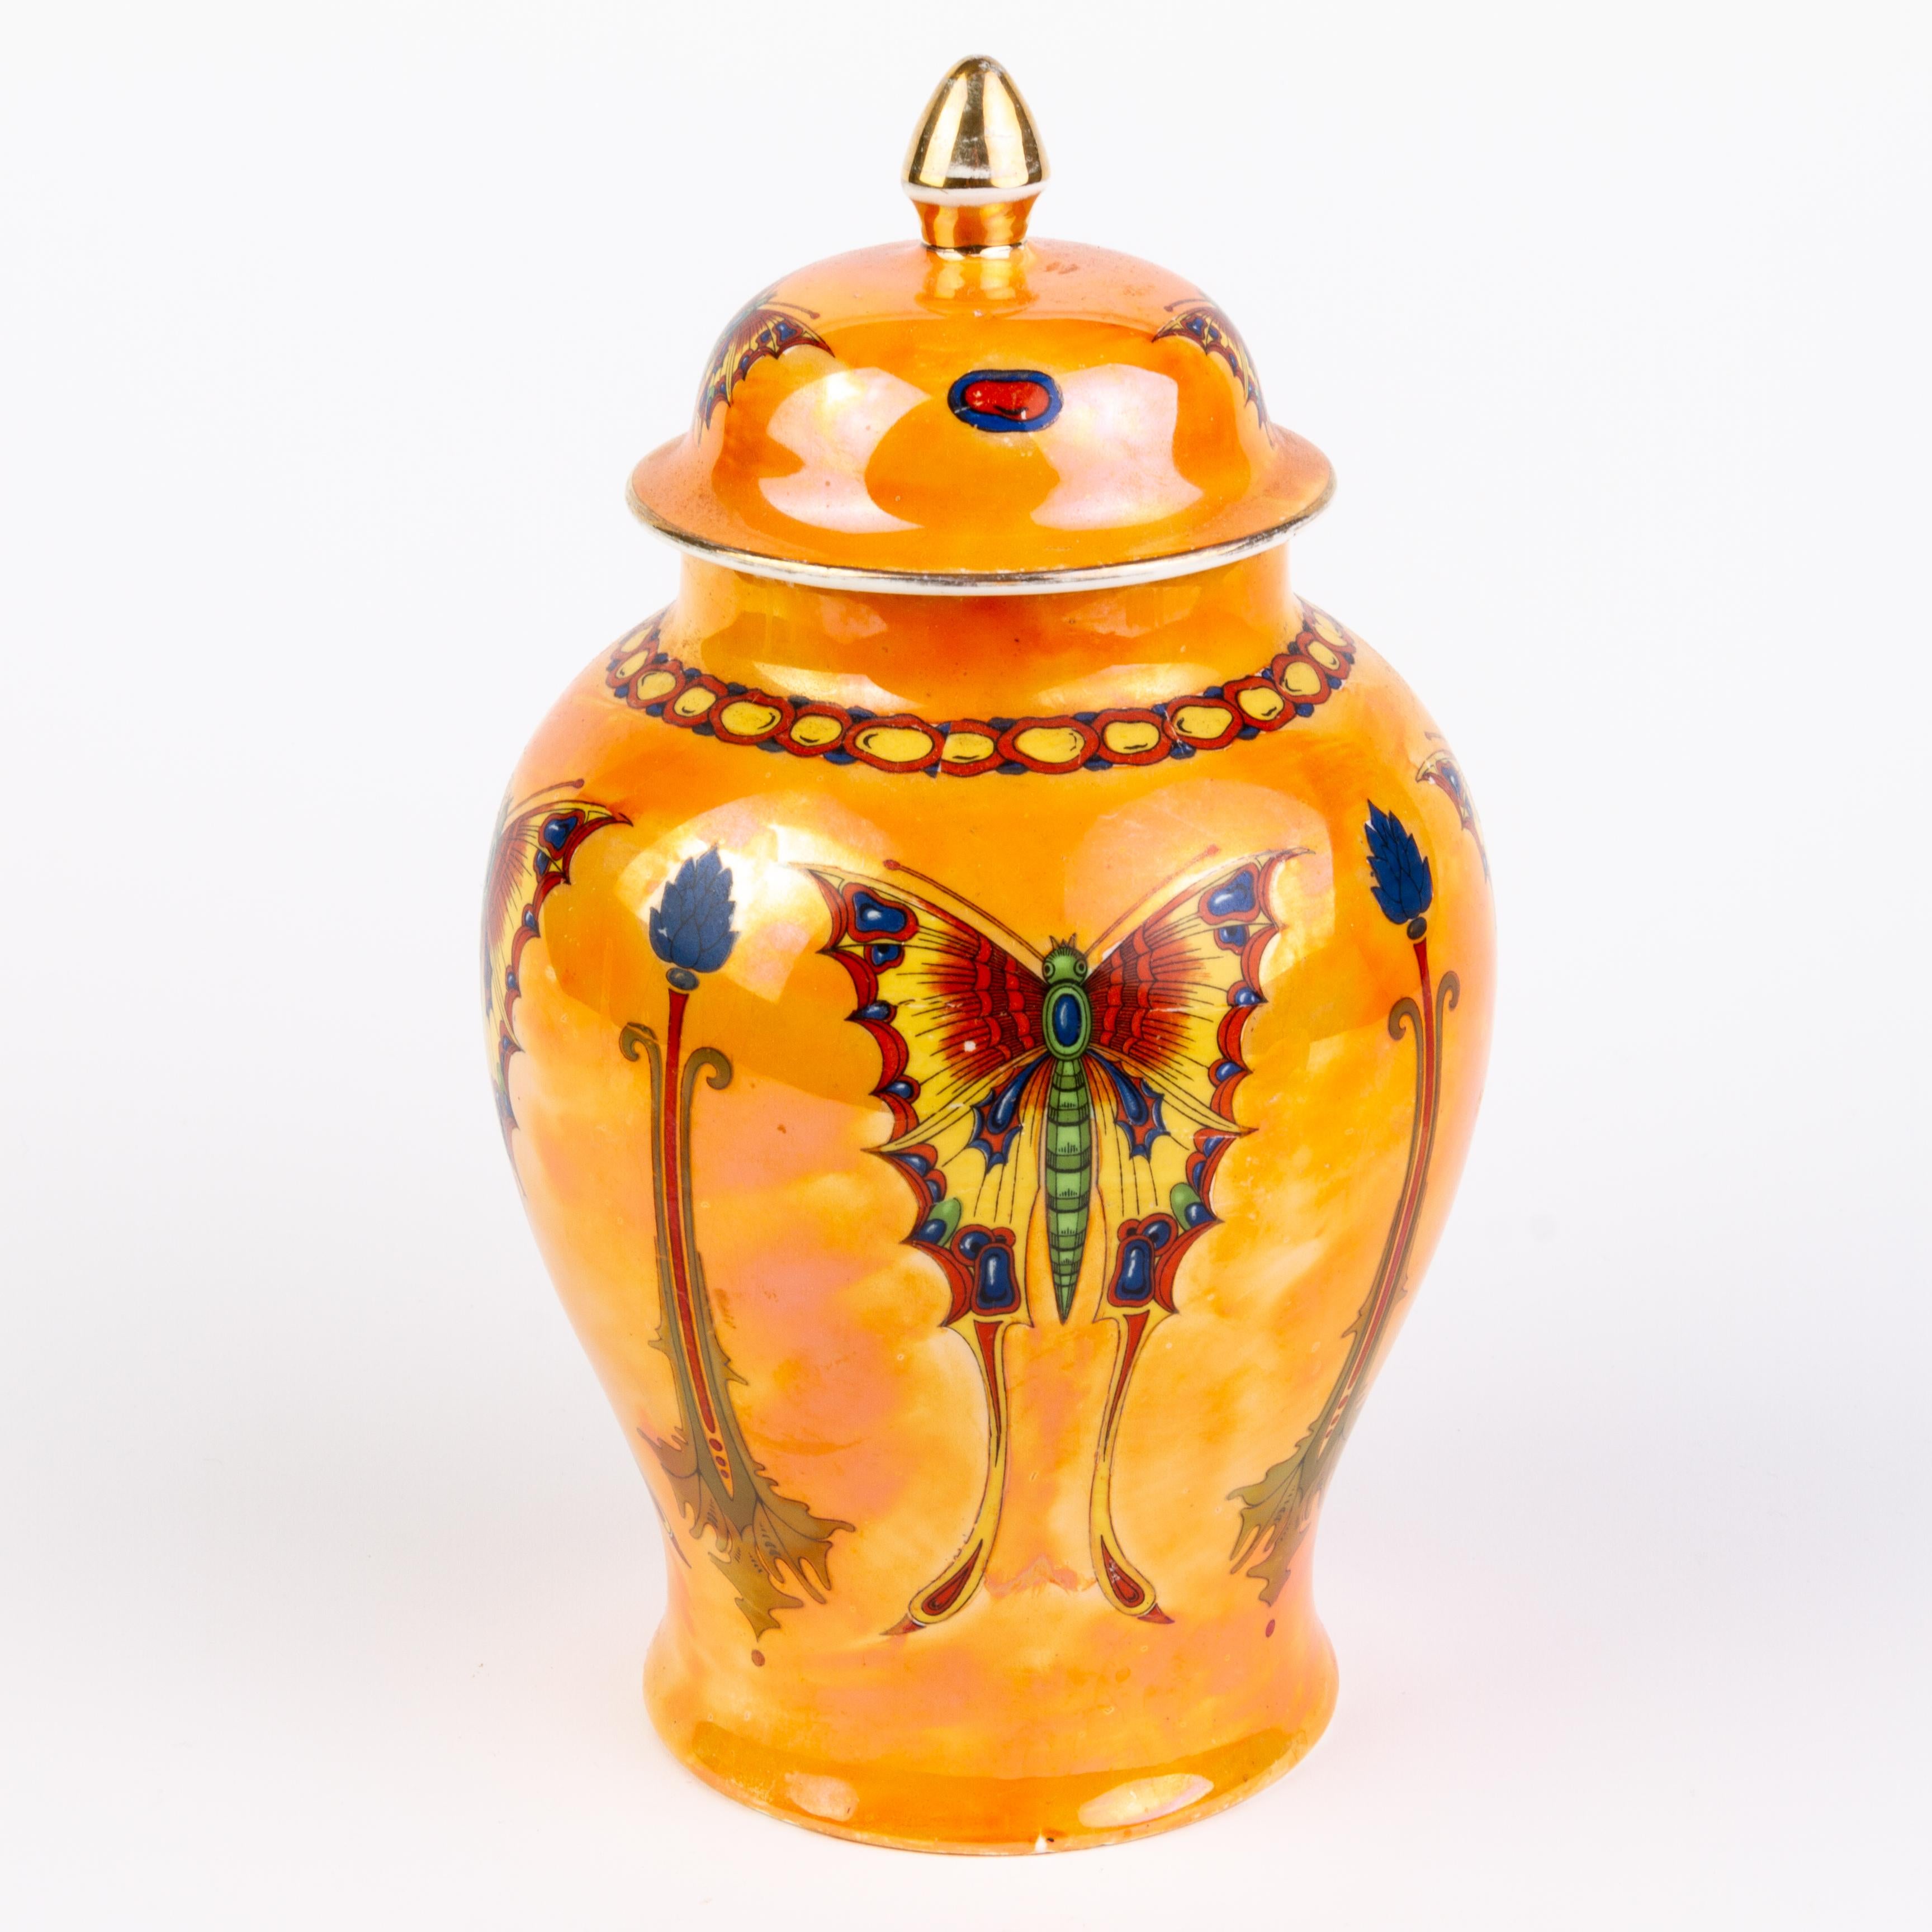 English Crown Ducal Iridescent Orientalist Art Deco Butterfly Lidded Vase 1930s
Good condition 
Free international shipping.